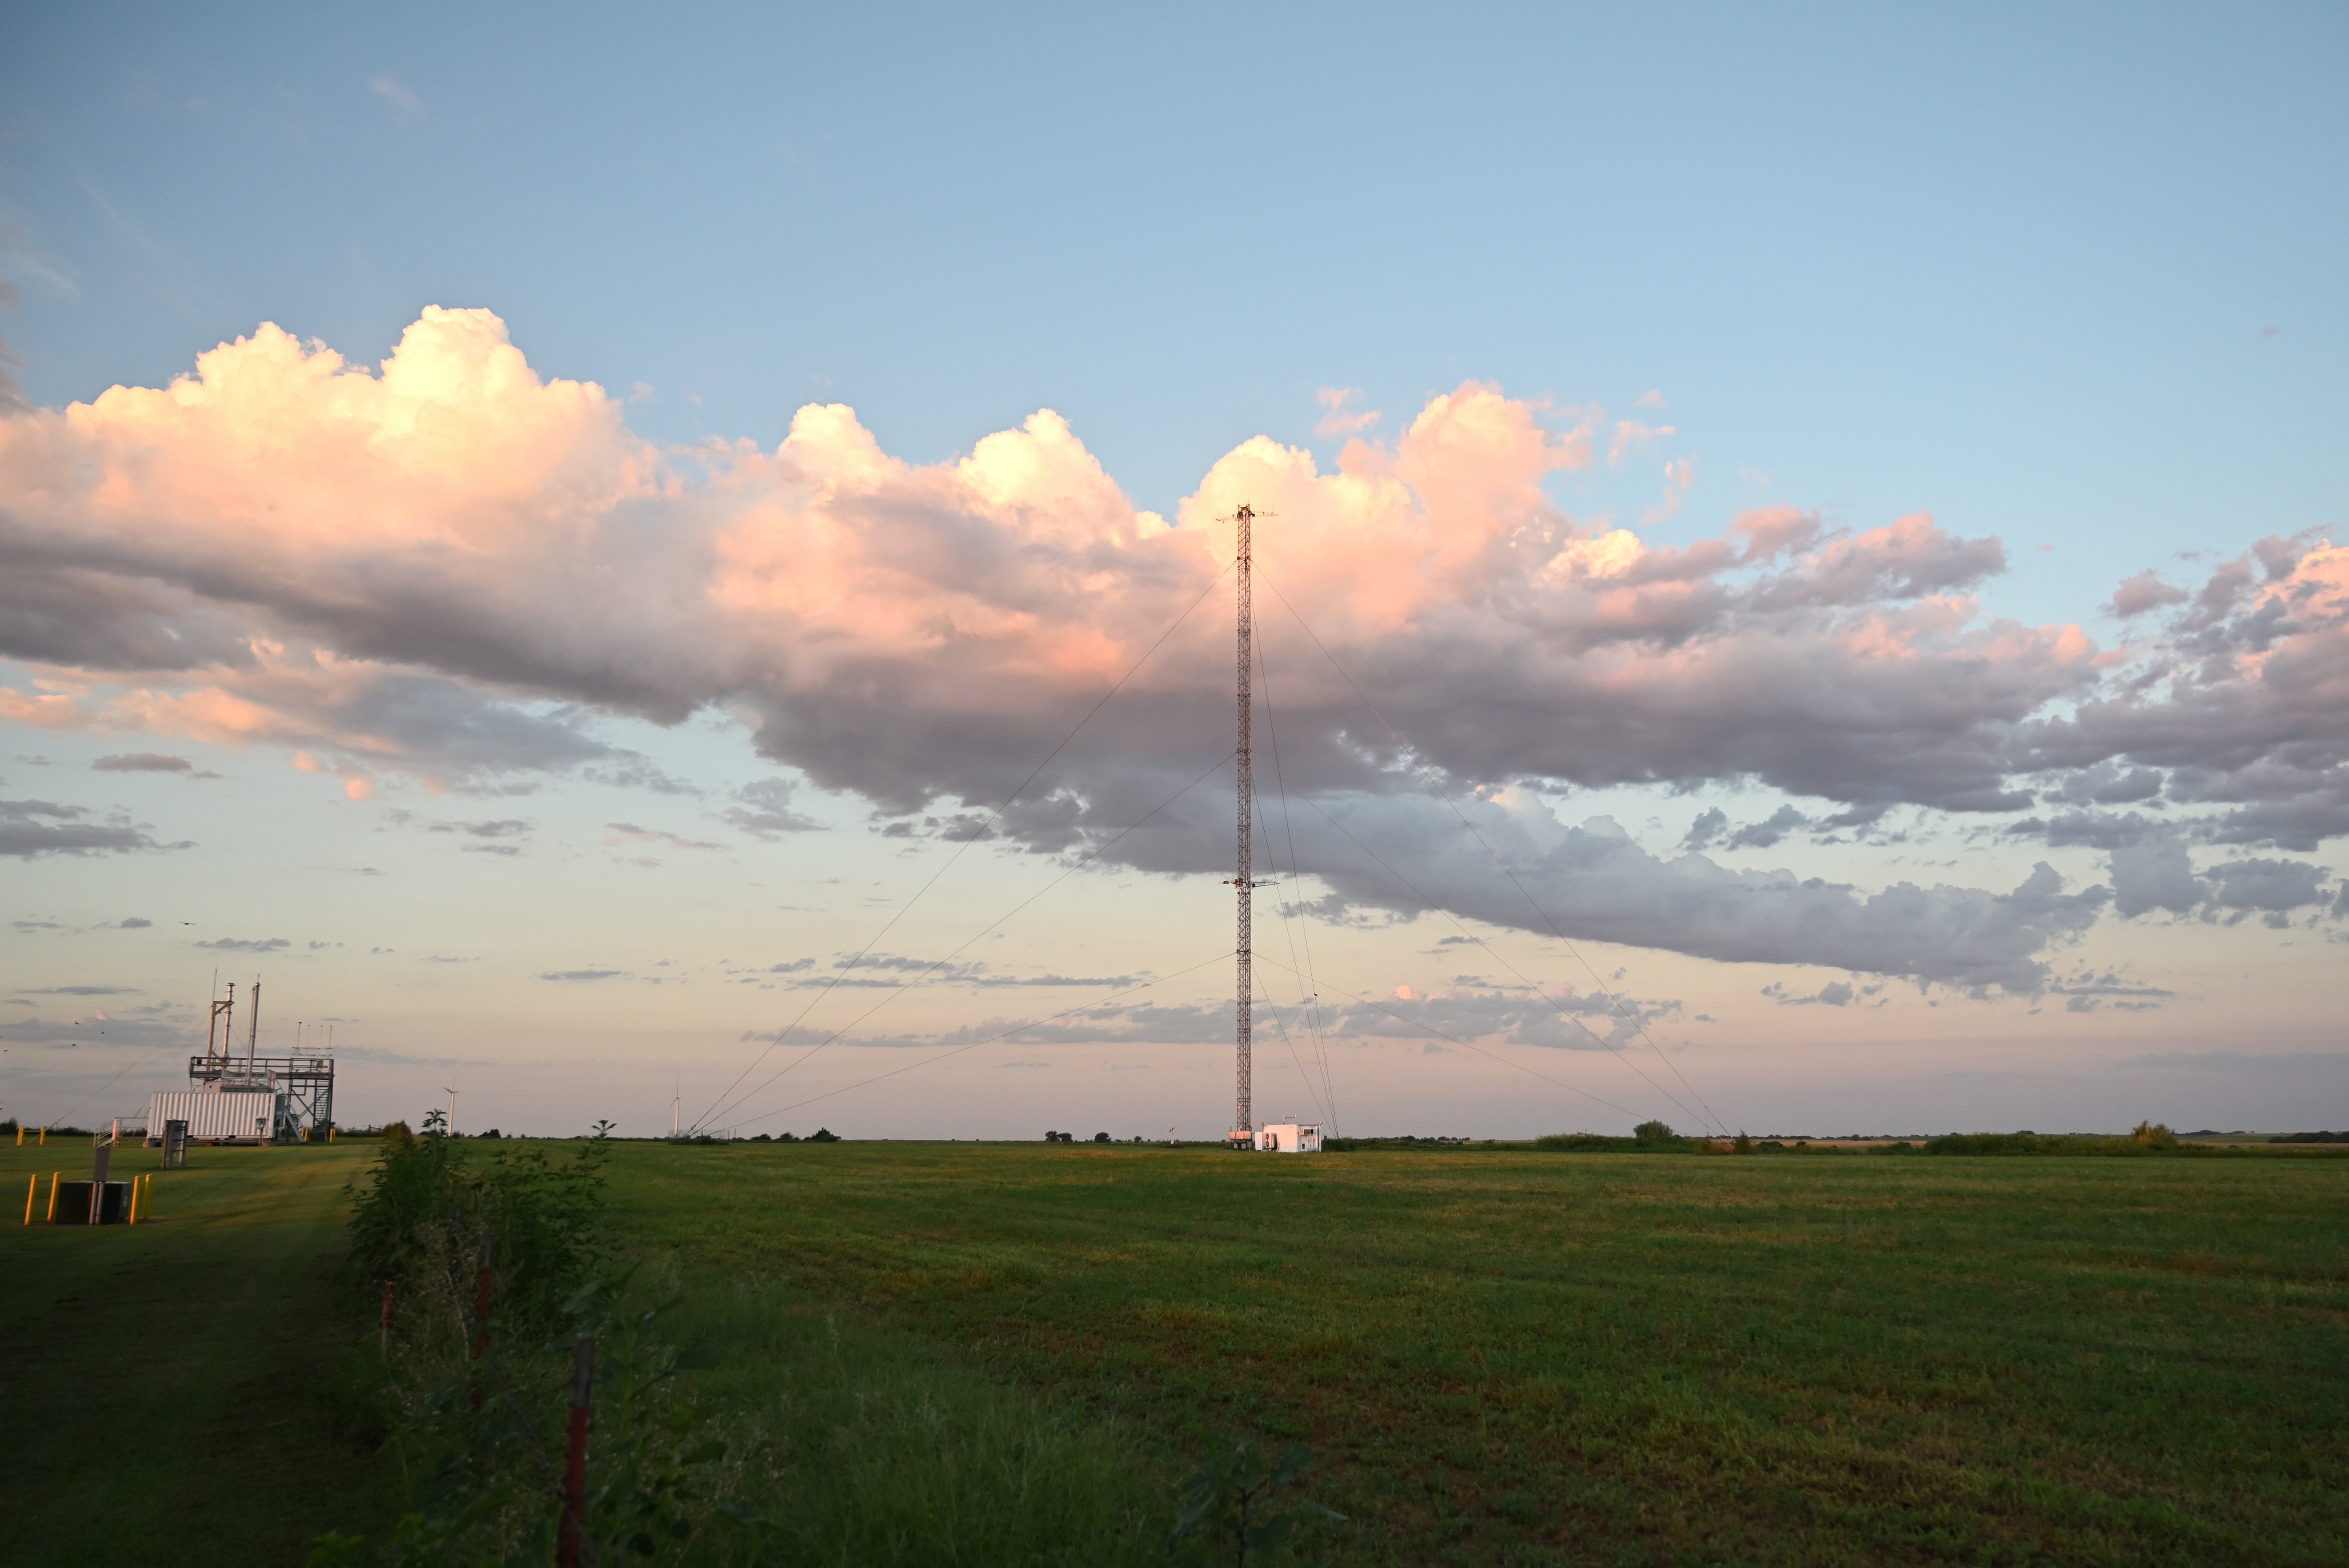 ARM's Southern Great Plains atmospheric observatory